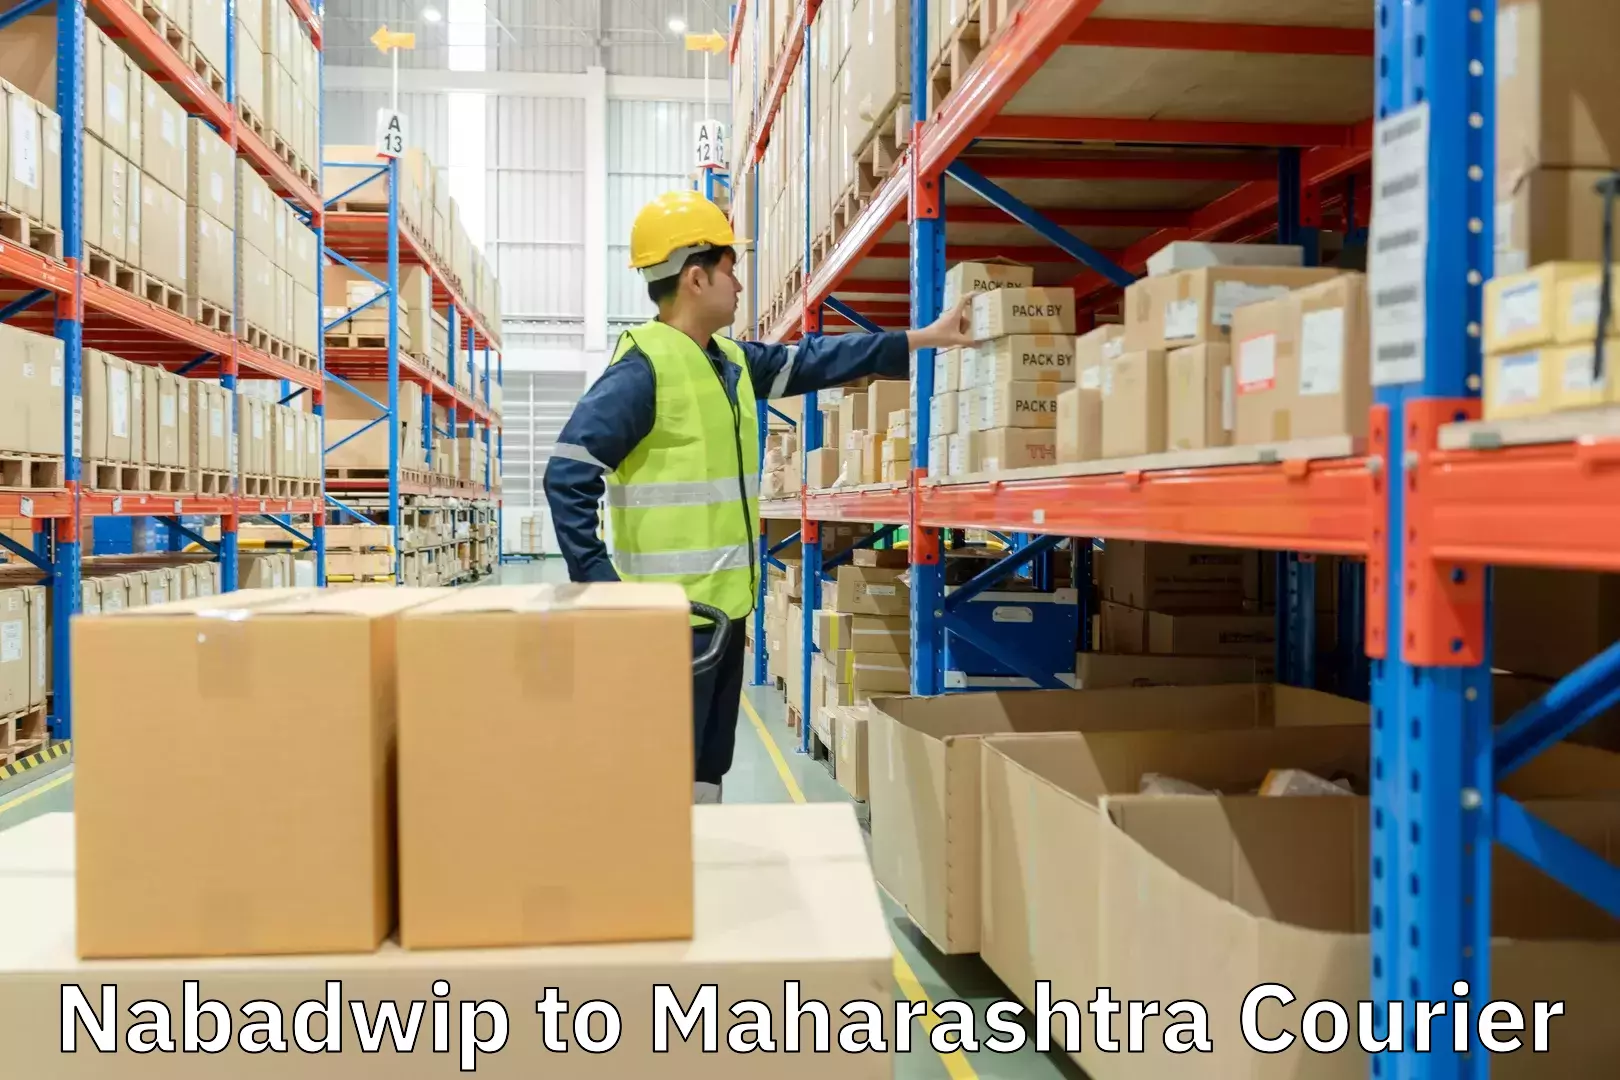 Nationwide delivery network Nabadwip to Junnar